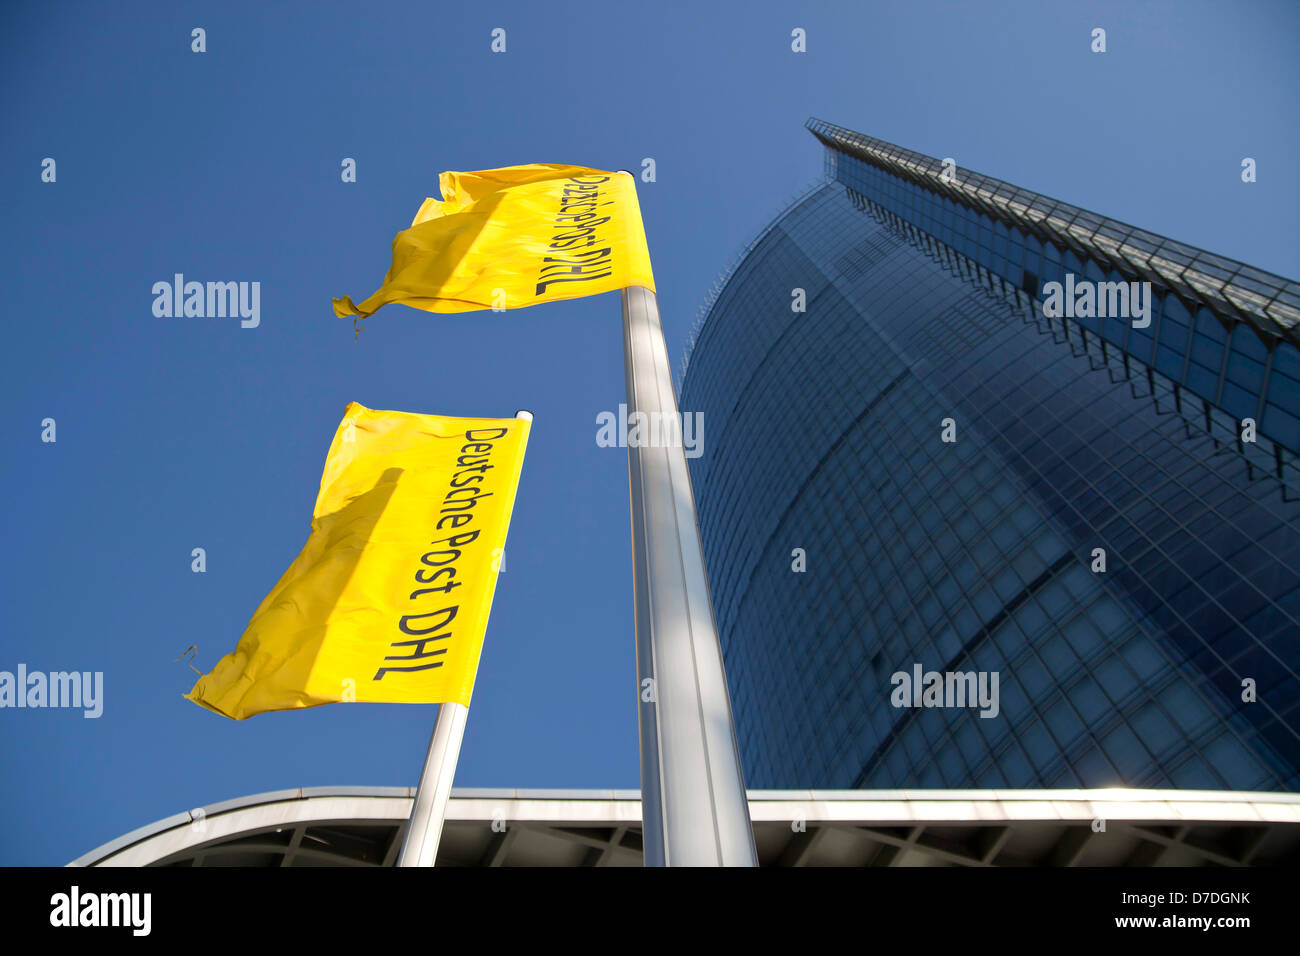 Post Tower, the headquarters of the logistic company Deutsche Post DHL in Bonn, North Rhine-Westphalia, Germany, Stock Photo